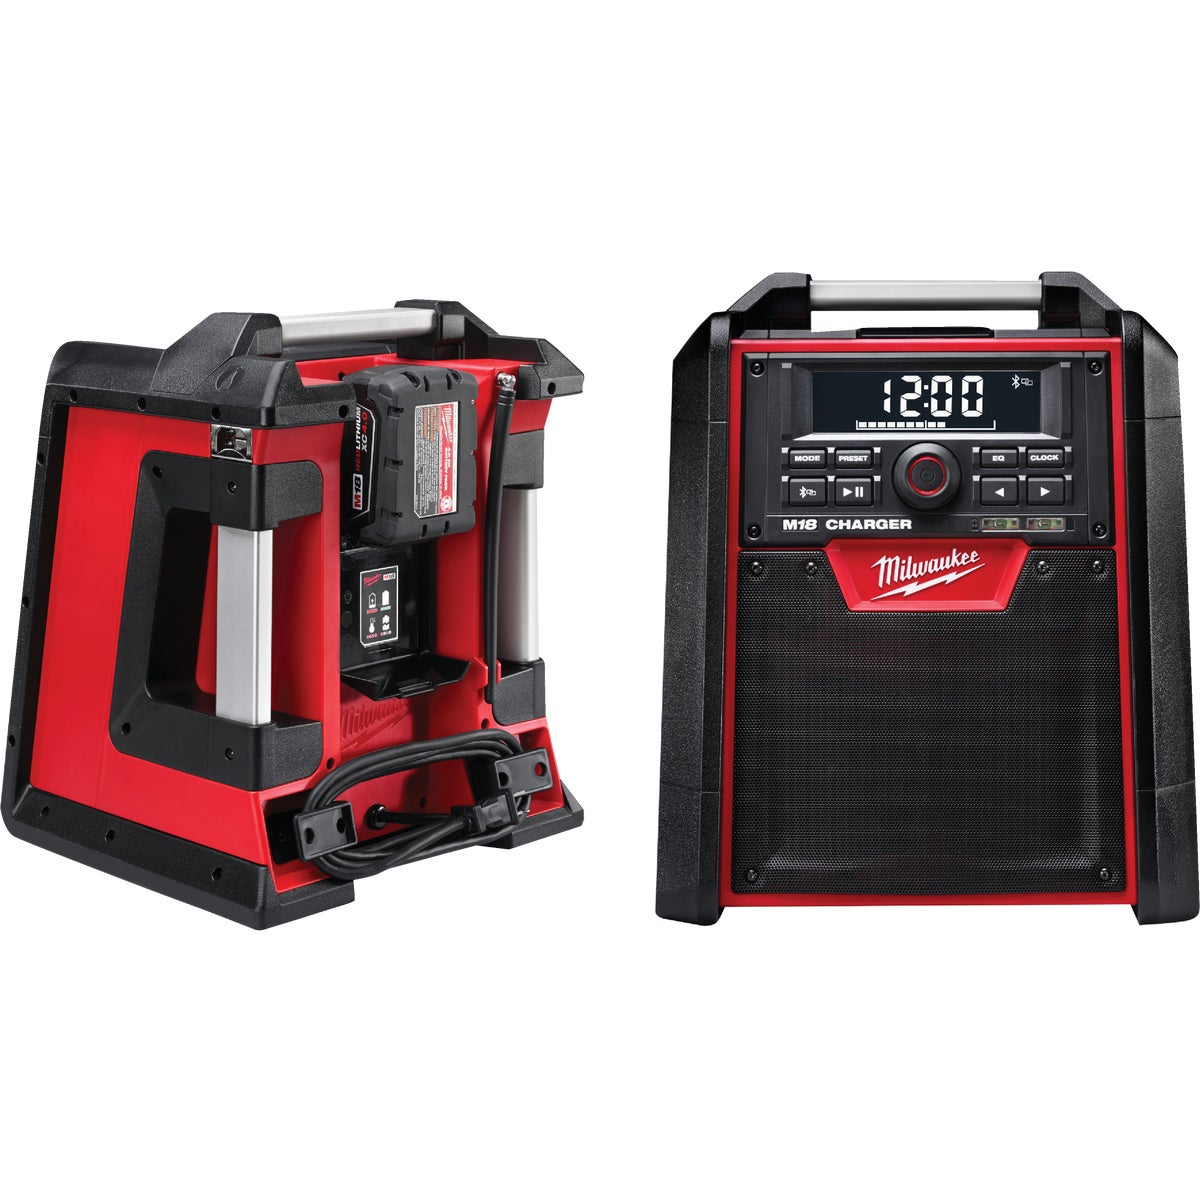 Milwaukee M18 18-Volt Lithium-Ion Bluetooth Cordless Jobsite Radio + Charger (Tool Only)